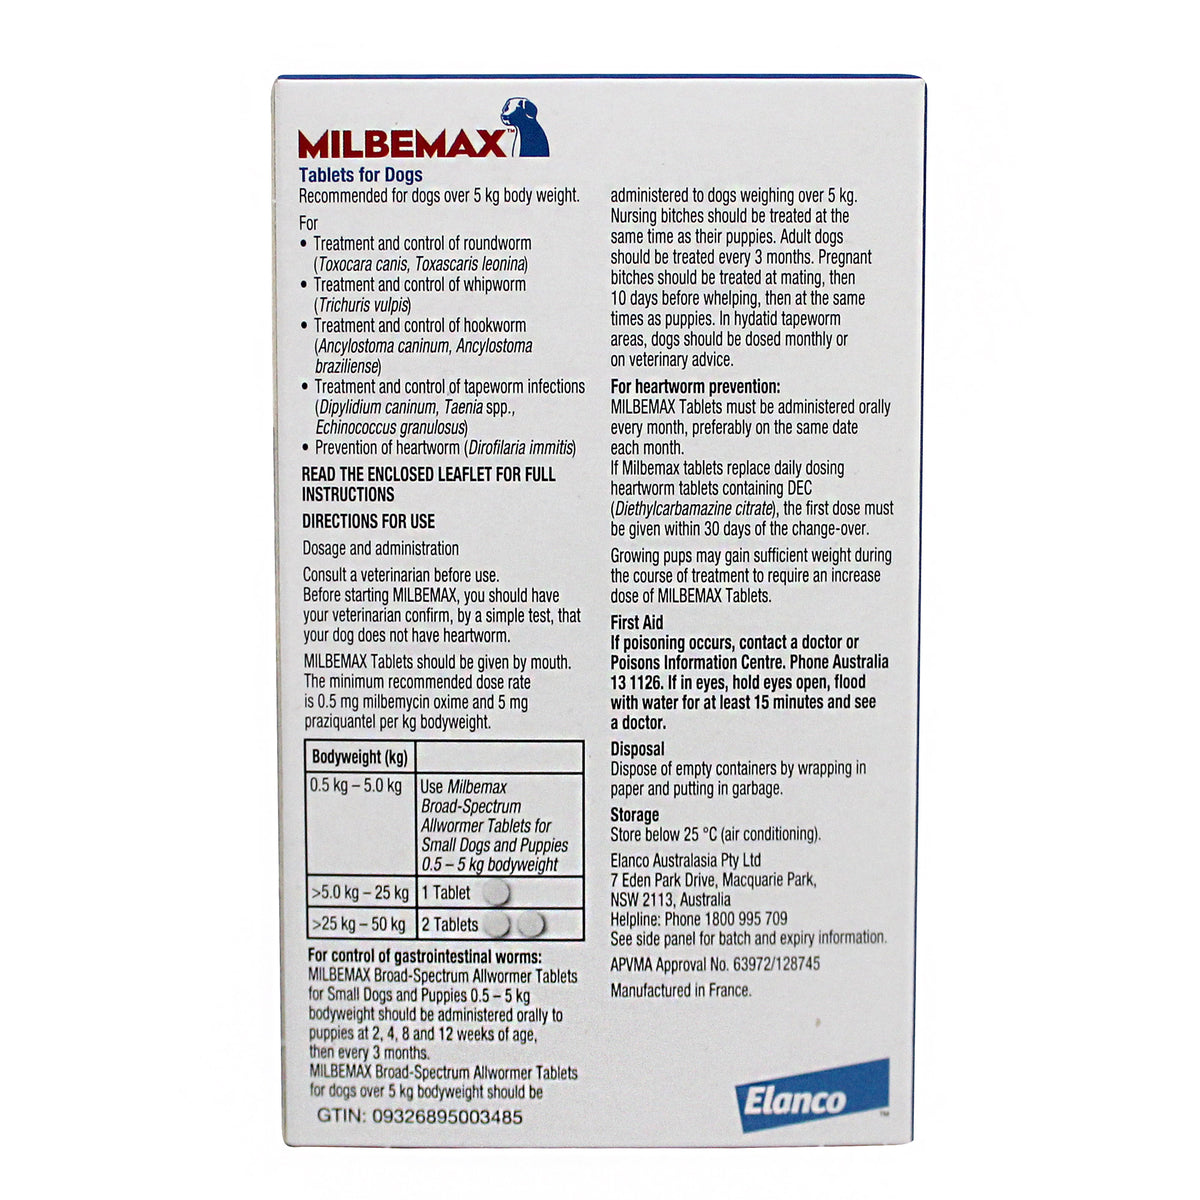 Milbemax Broad Spectrum Wormer for Dogs